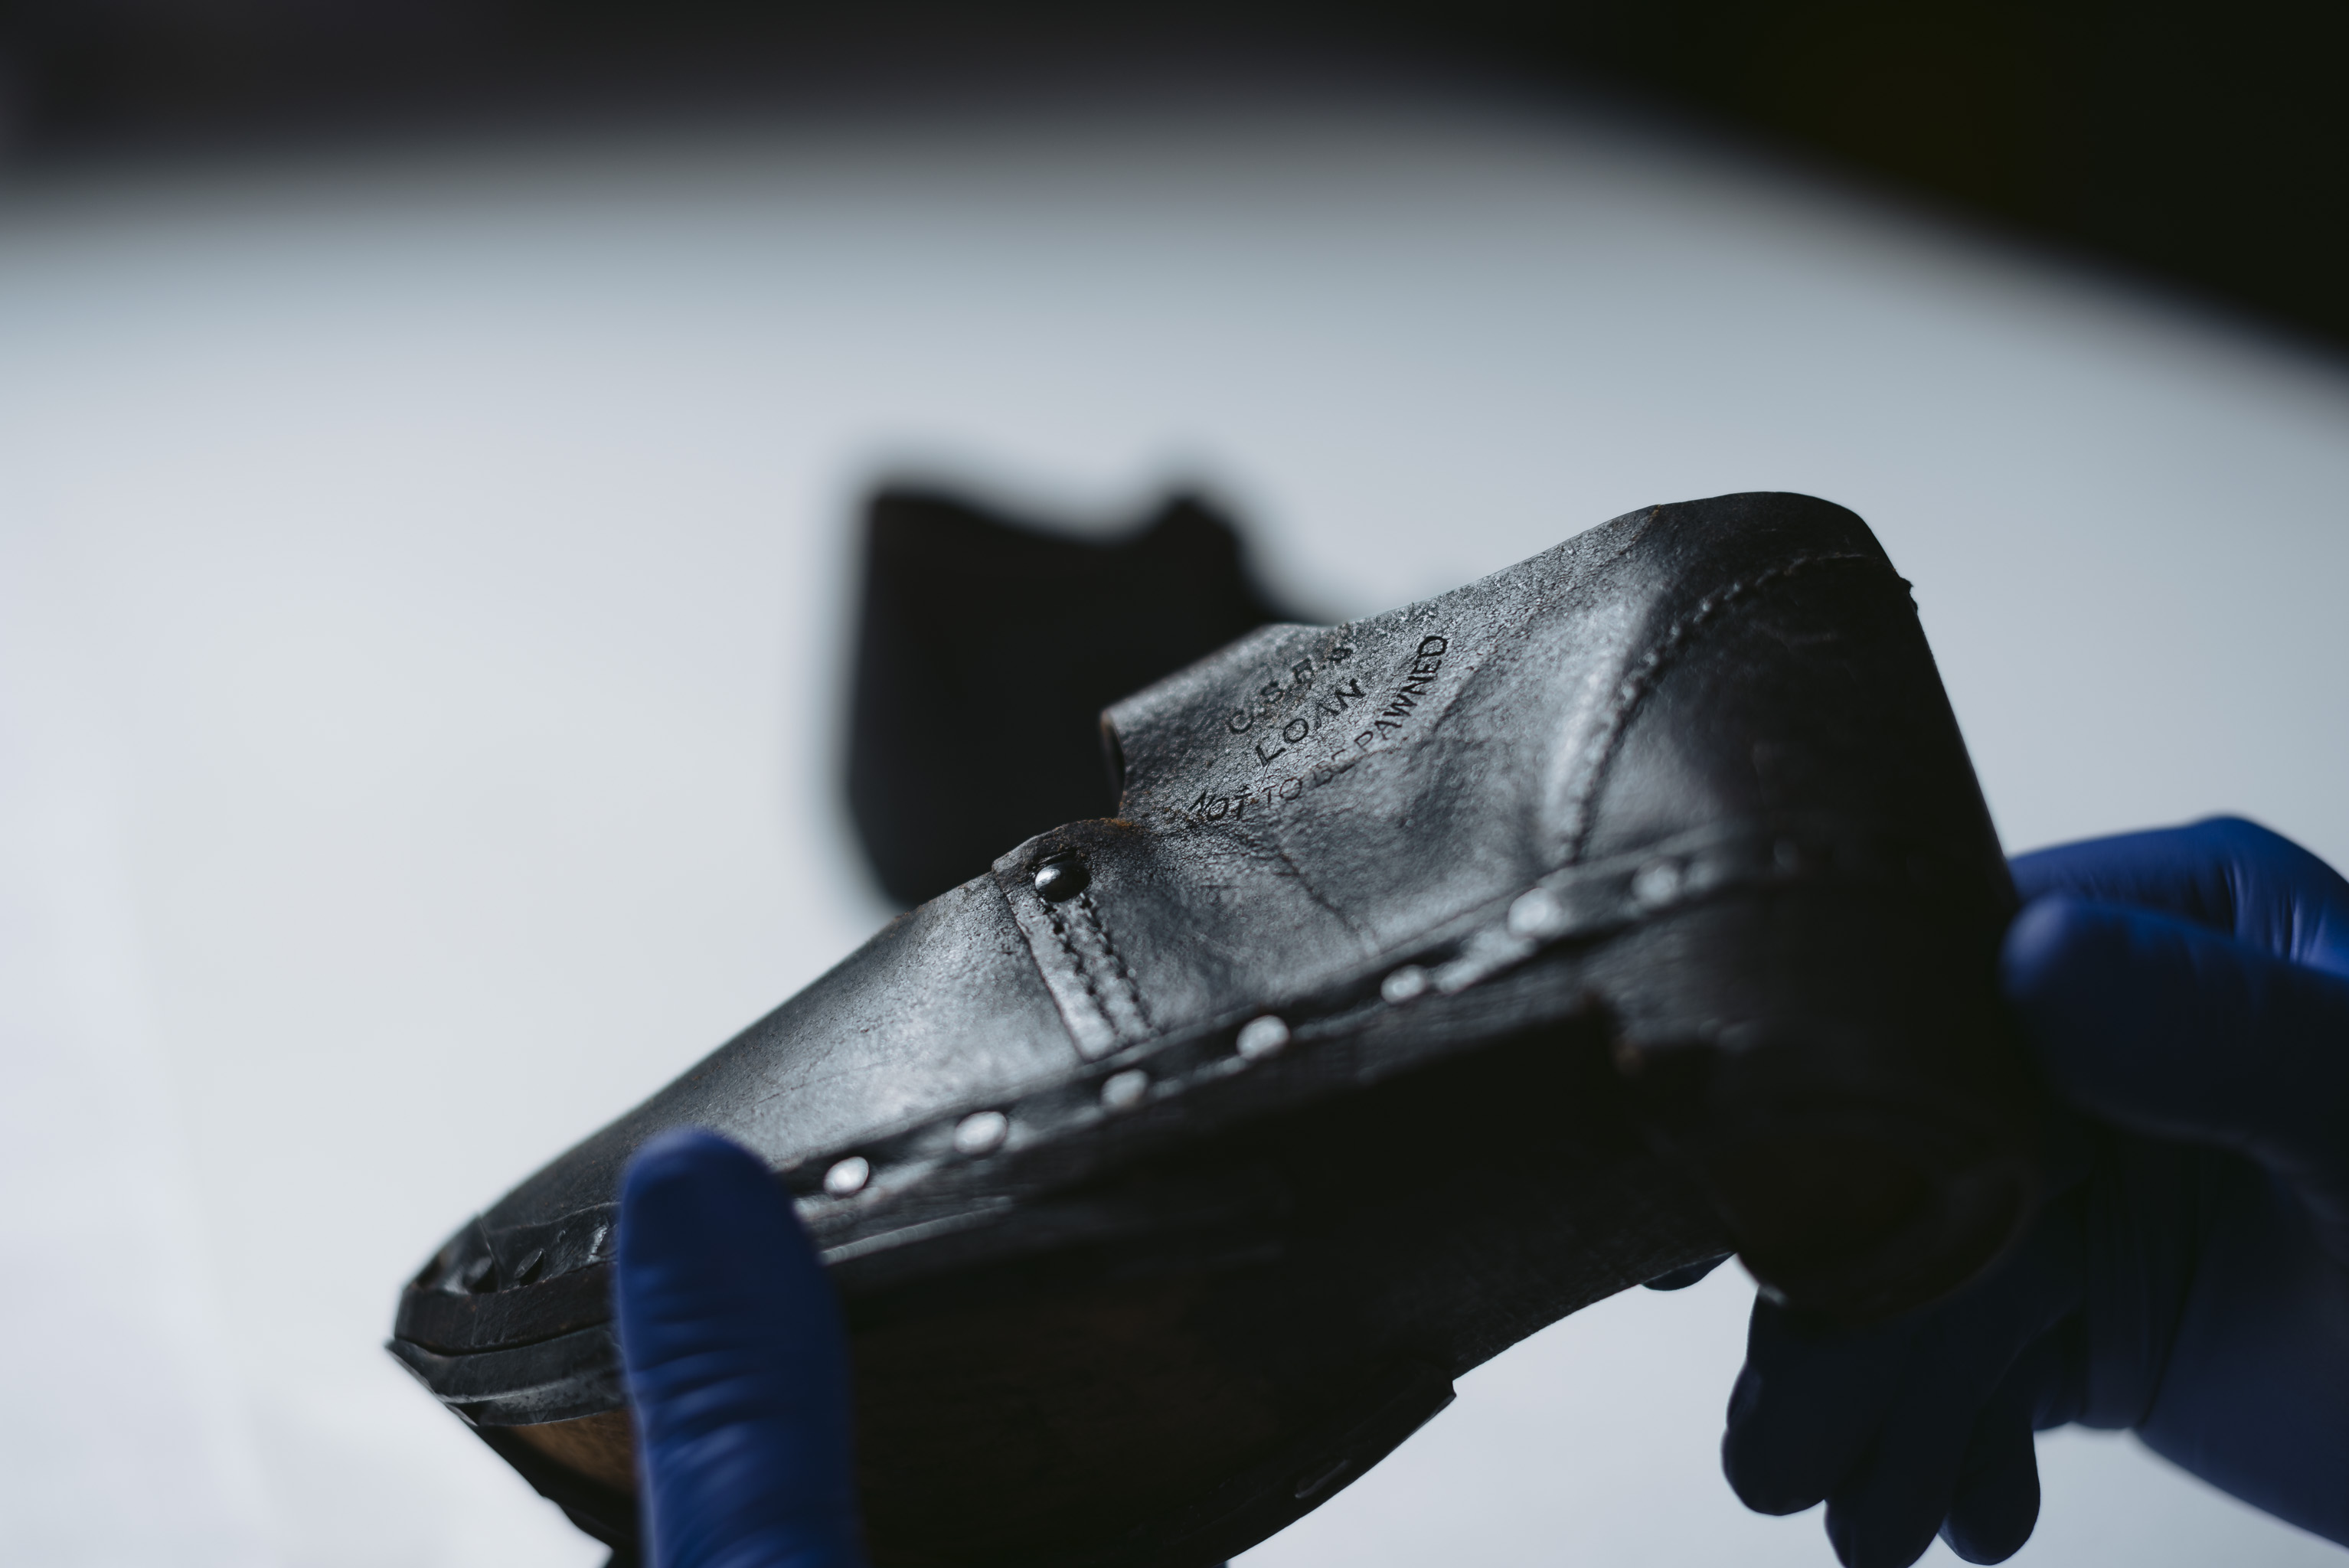 From poverty clogs to killer heels: the 1,000-year story of British footwear, Social history